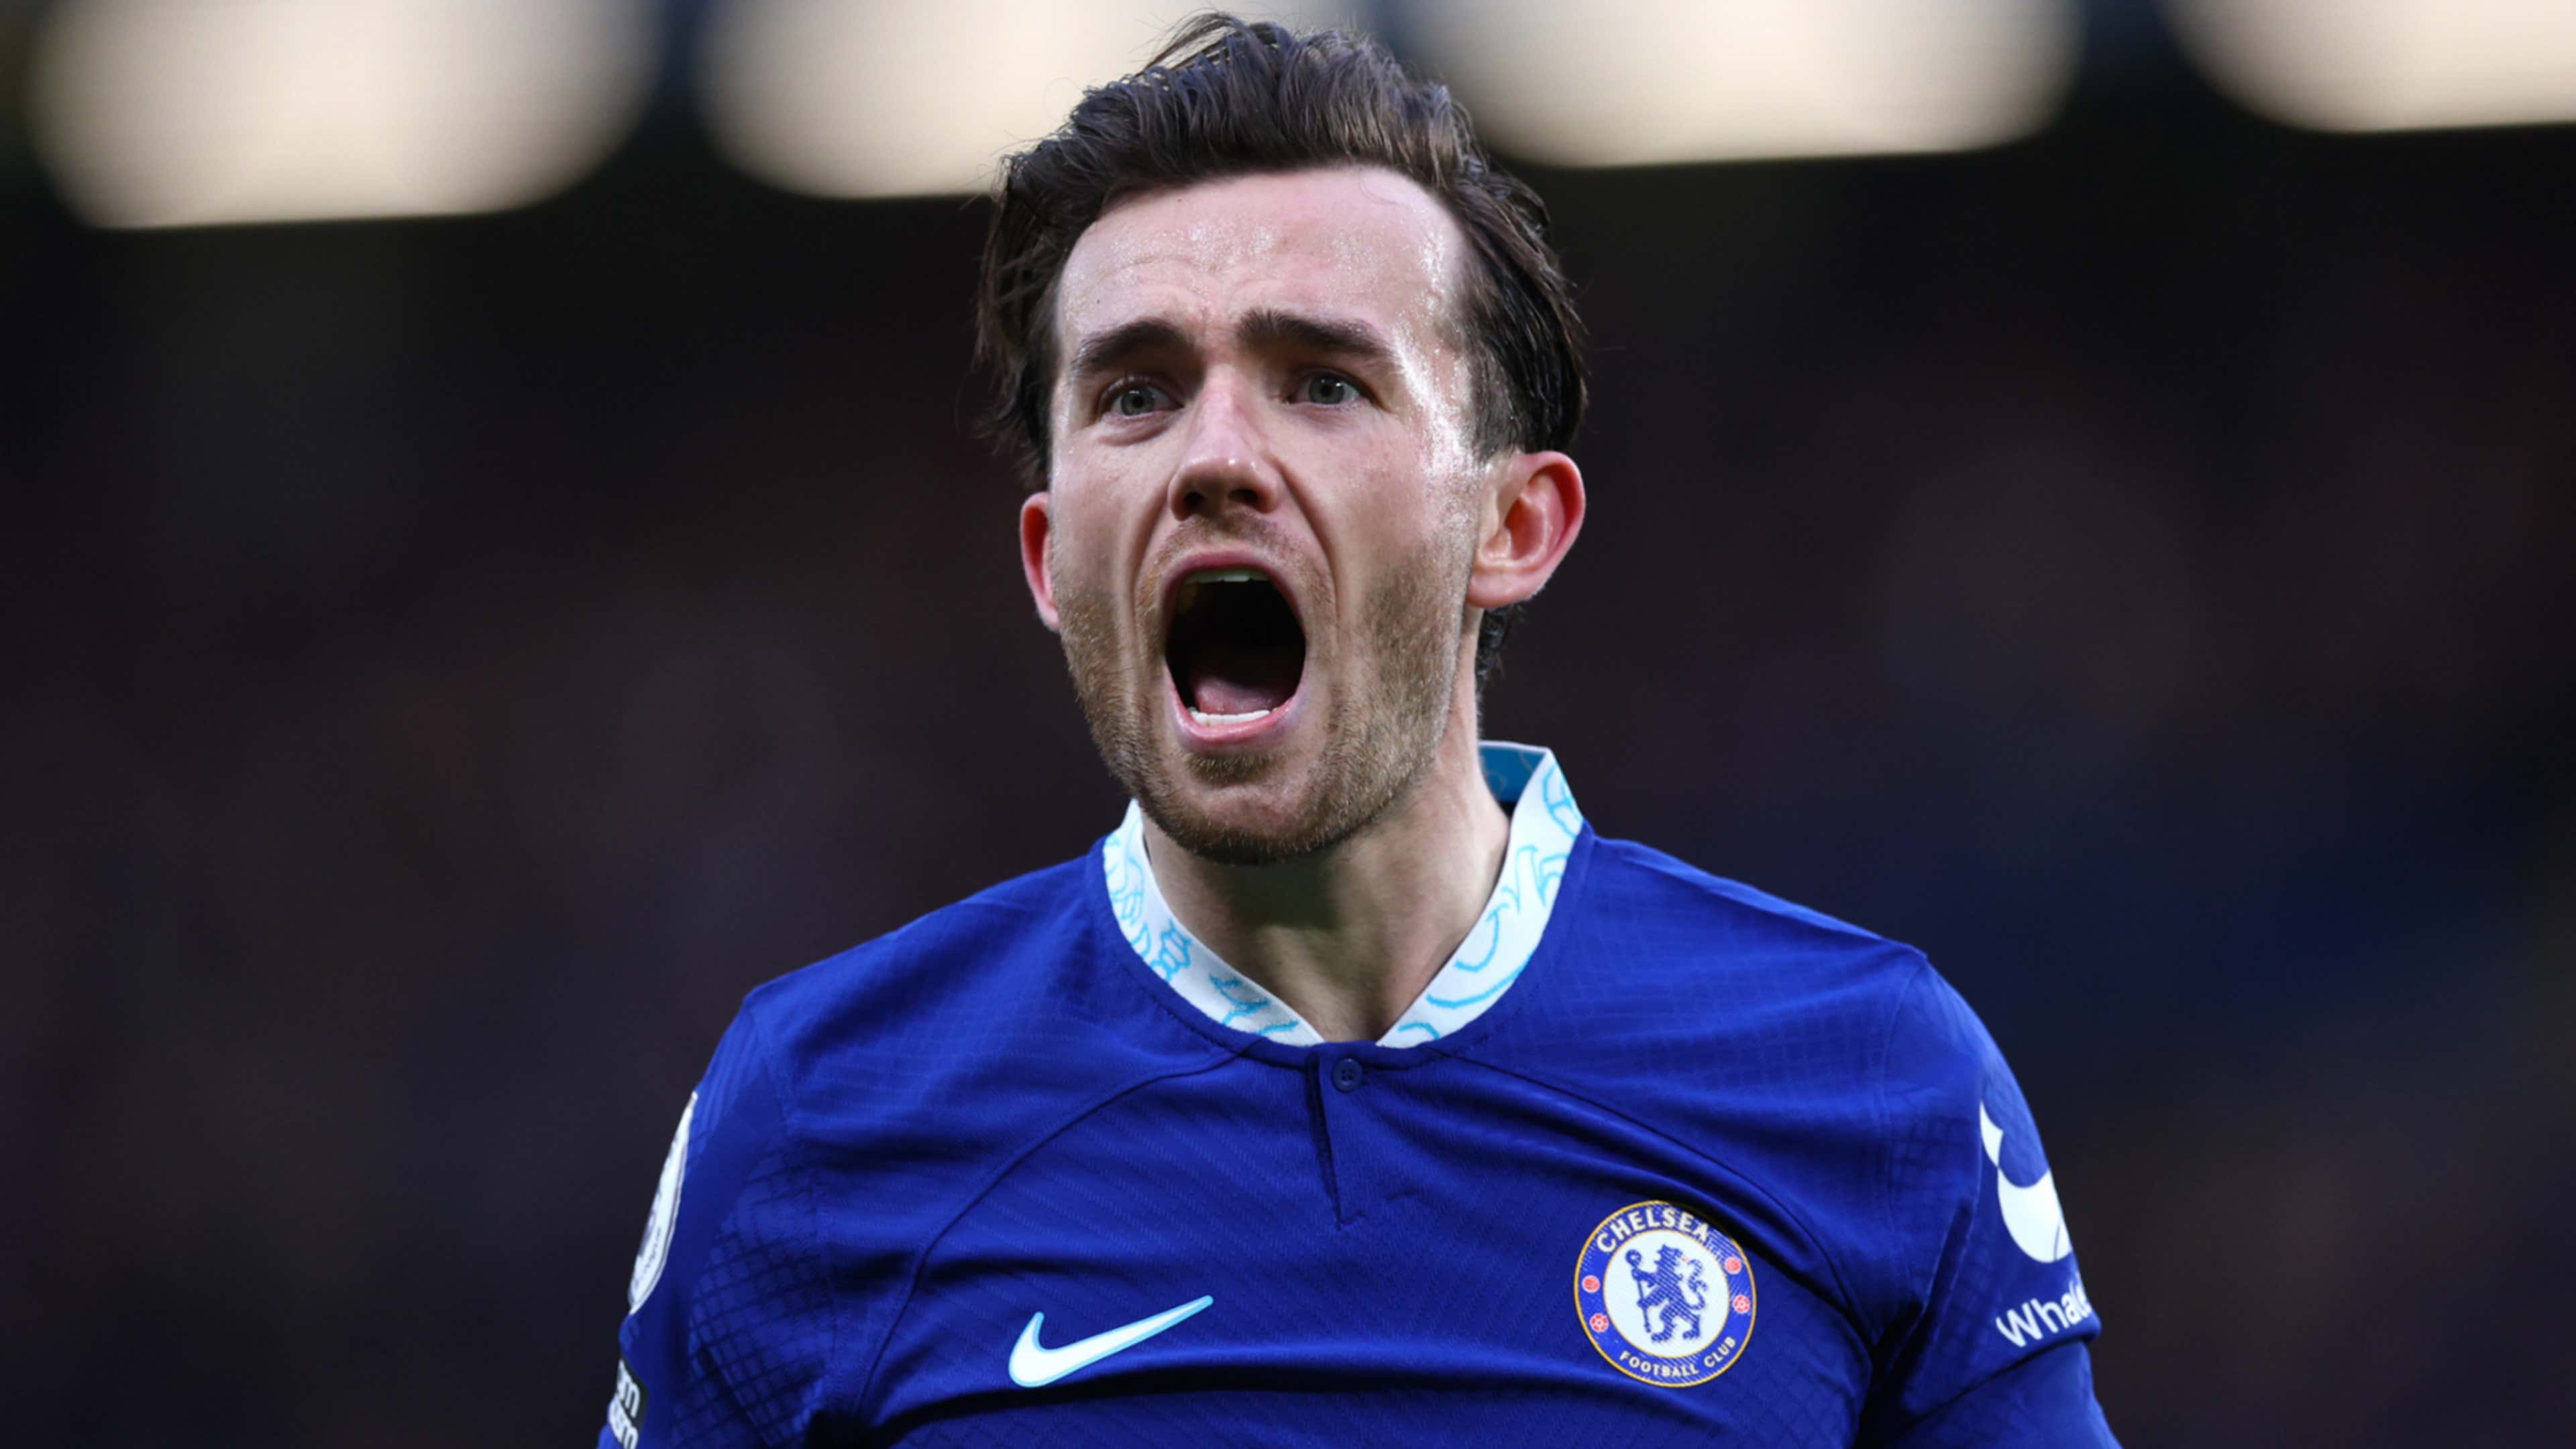  Ben Chilwell, a professional football player, is seen celebrating a goal while wearing a blue Chelsea jersey.